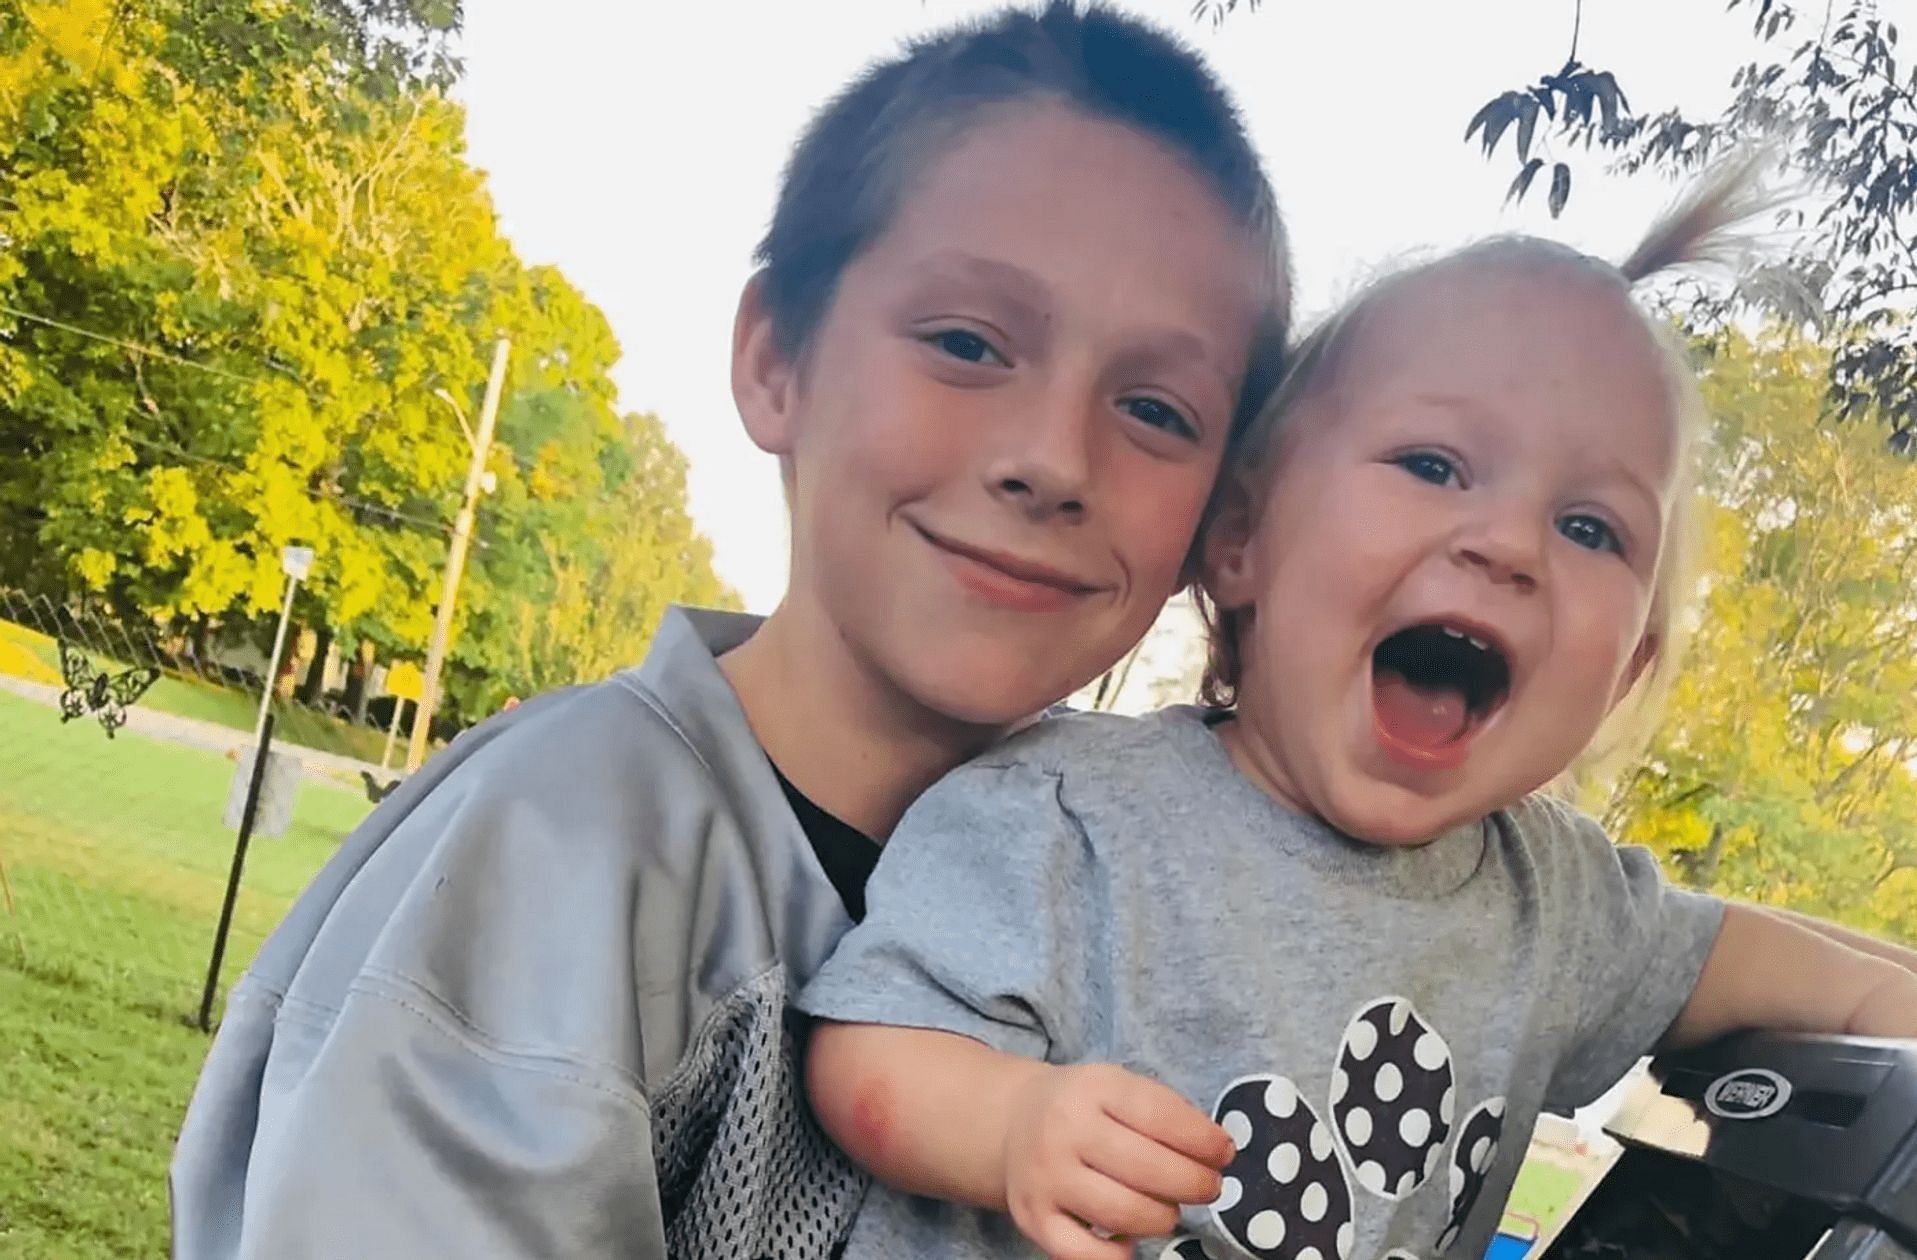 &quot;Cam was trying to save his younger sister, just like any elder loving brother&quot;: Mother of Camrynn who died in the disturbing fireworks accident. (Image via Facebook)